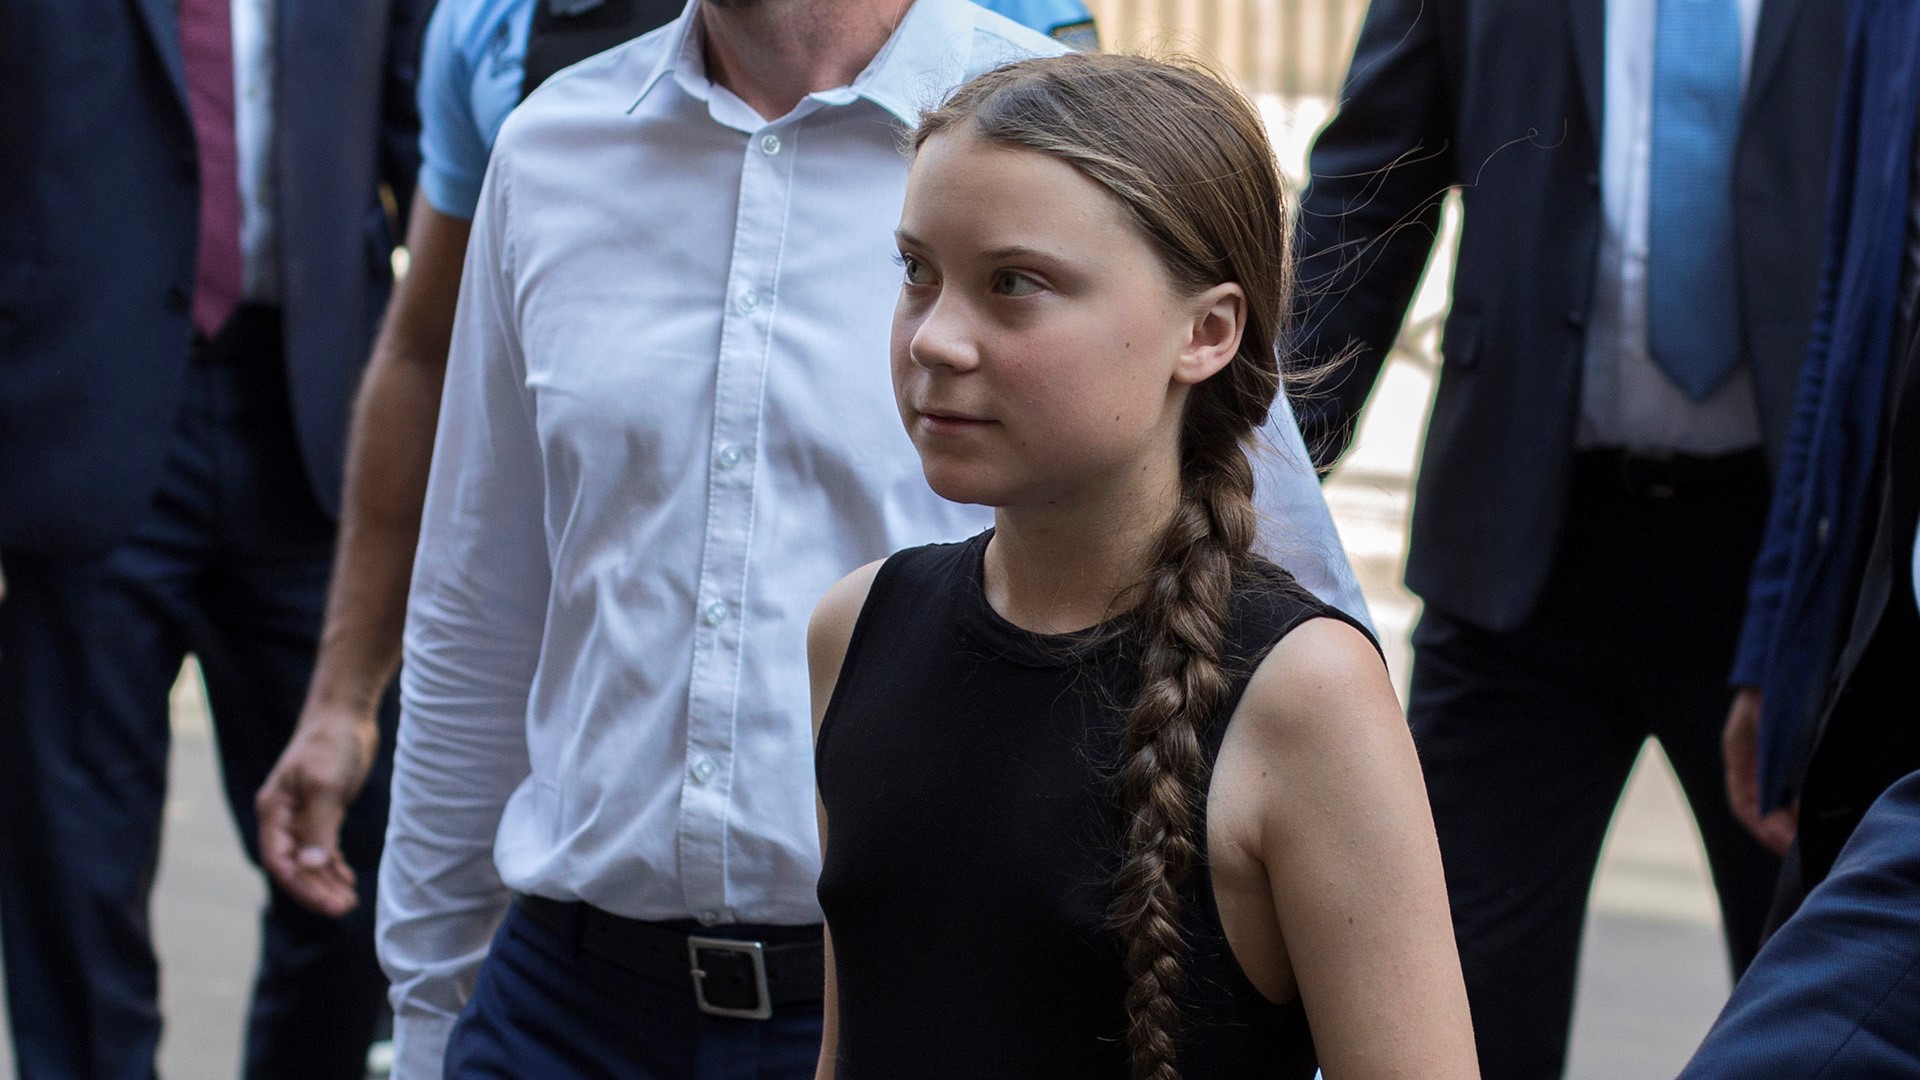 Climate activist Greta Thunberg, in an emotional speech at the United Nations chided world leaders with the repeated phrase, 'how dare you?' (AP)